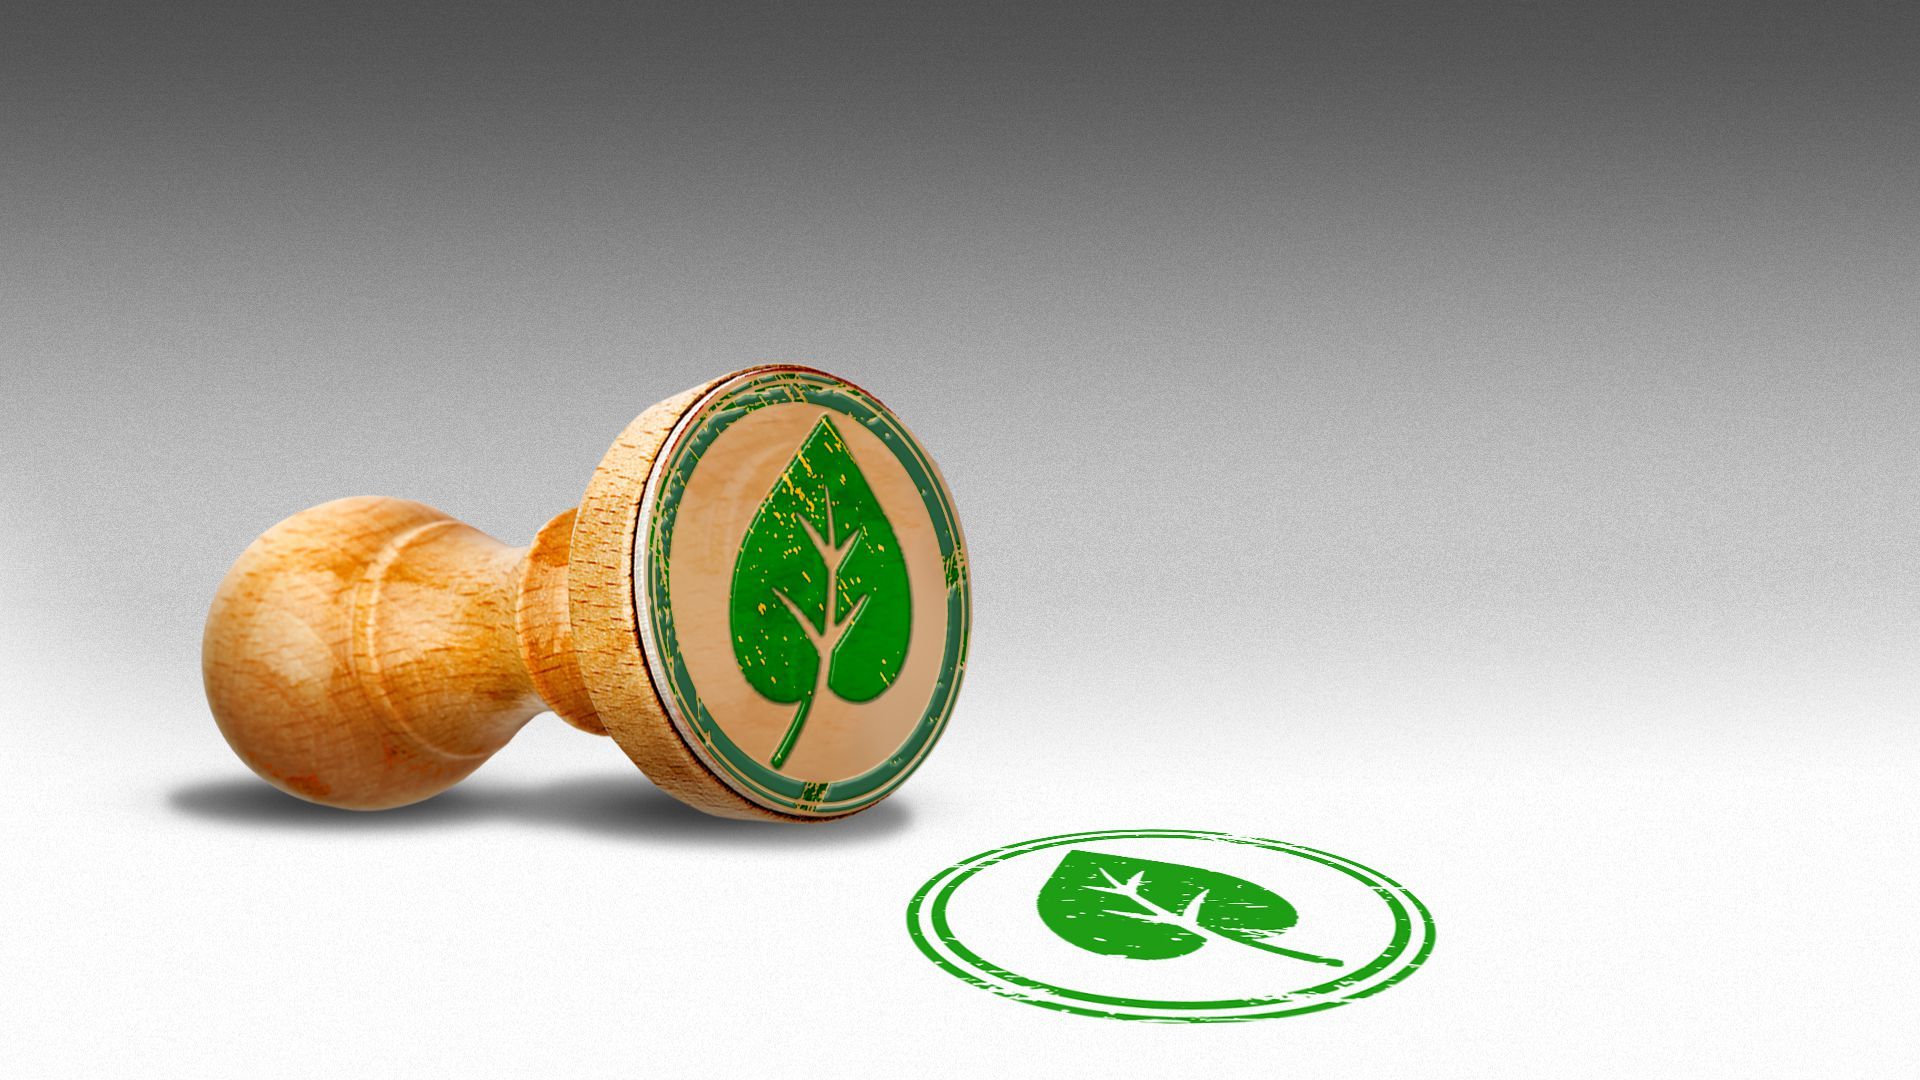 Illustration of a rubber stamp with a leaf shape